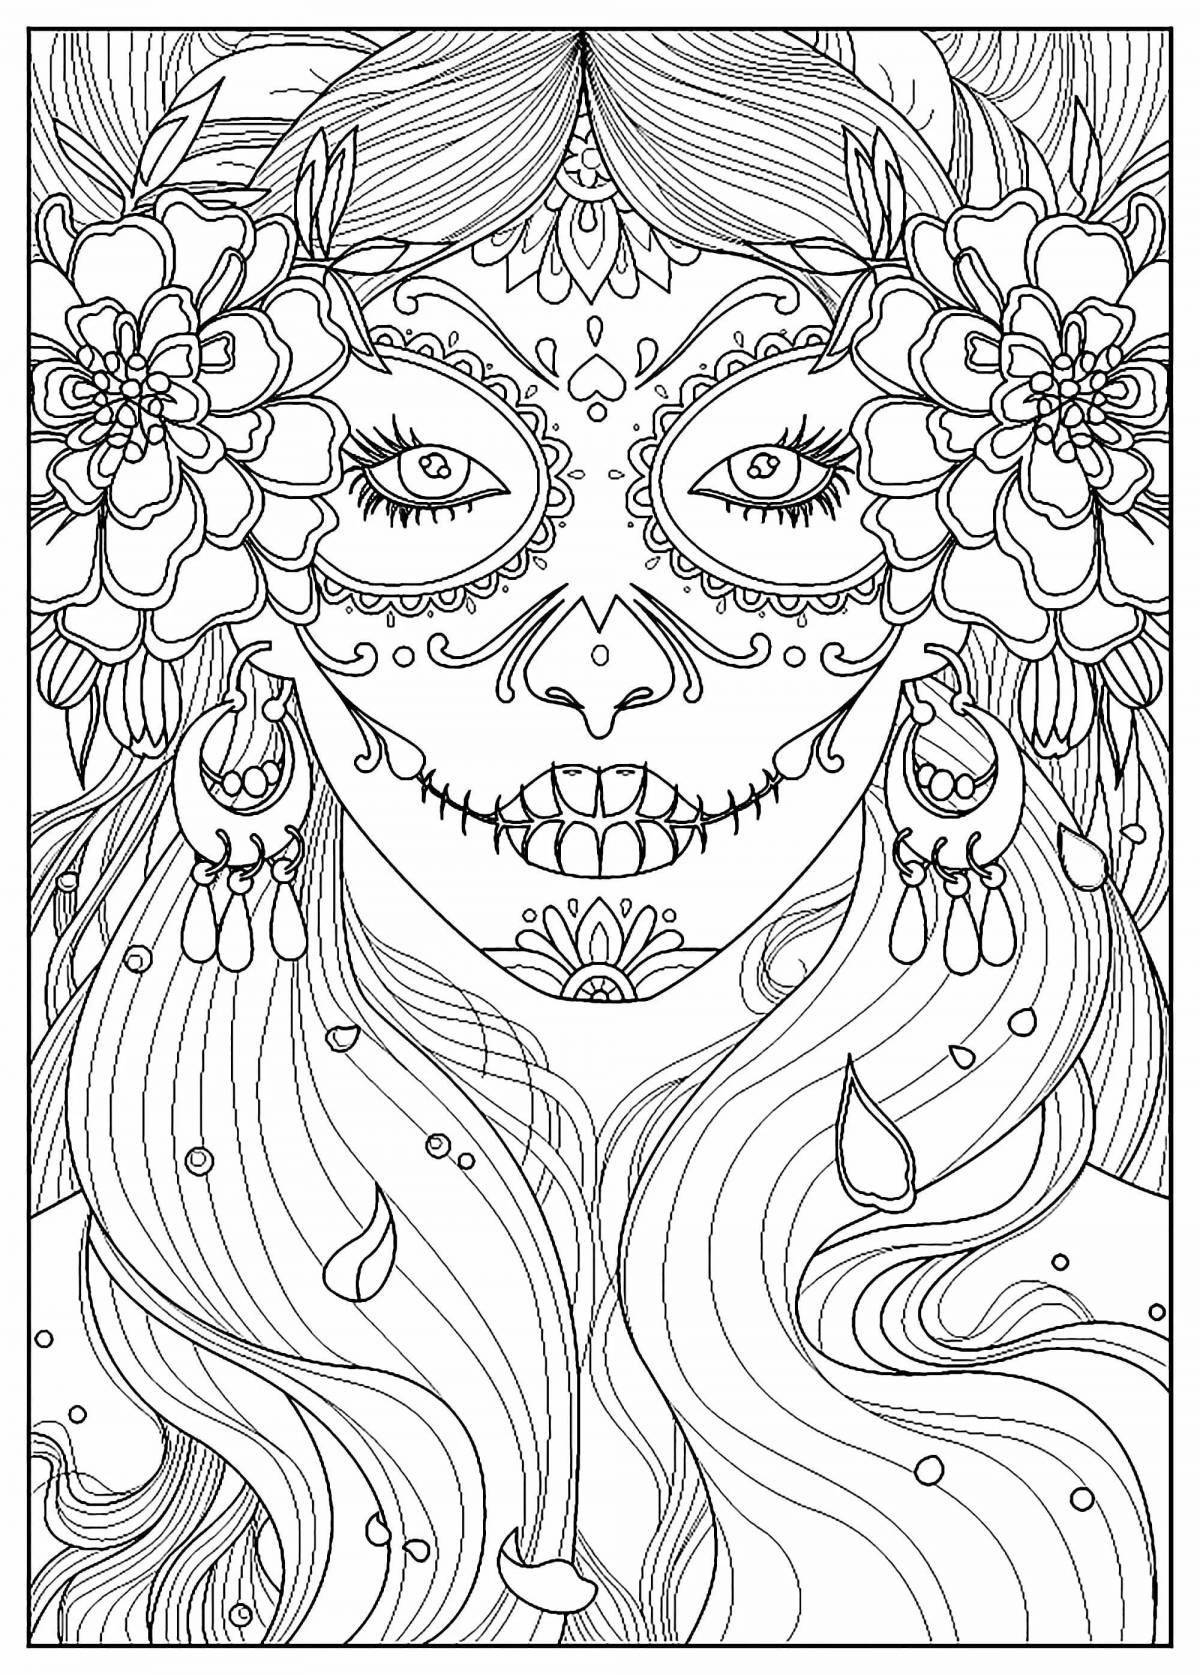 Amazing coloring book for adult girls